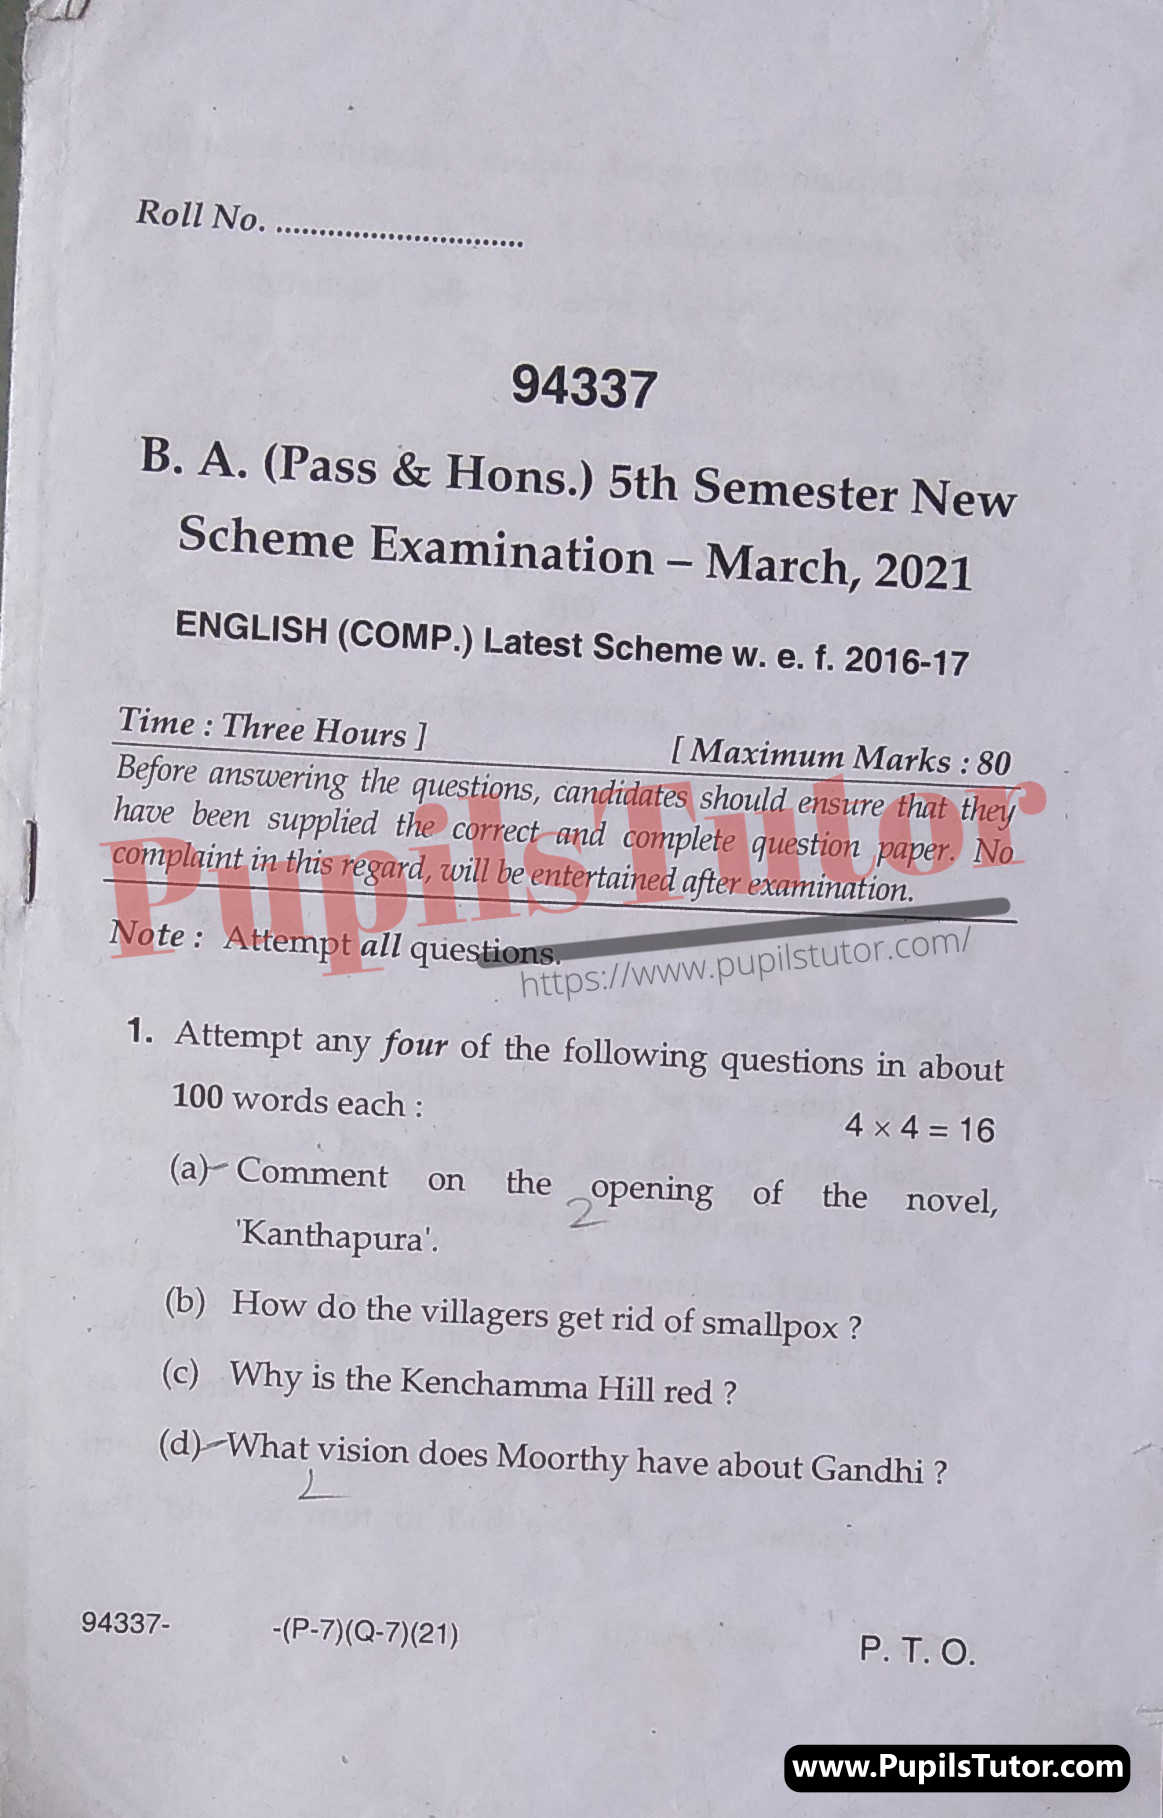 MDU (Maharshi Dayanand University, Rohtak Haryana) BA Pass Course And Honors 5th Semester Previous Year English Question Paper For March,2021 Exam (Question Paper Page 1) - pupilstutor.com